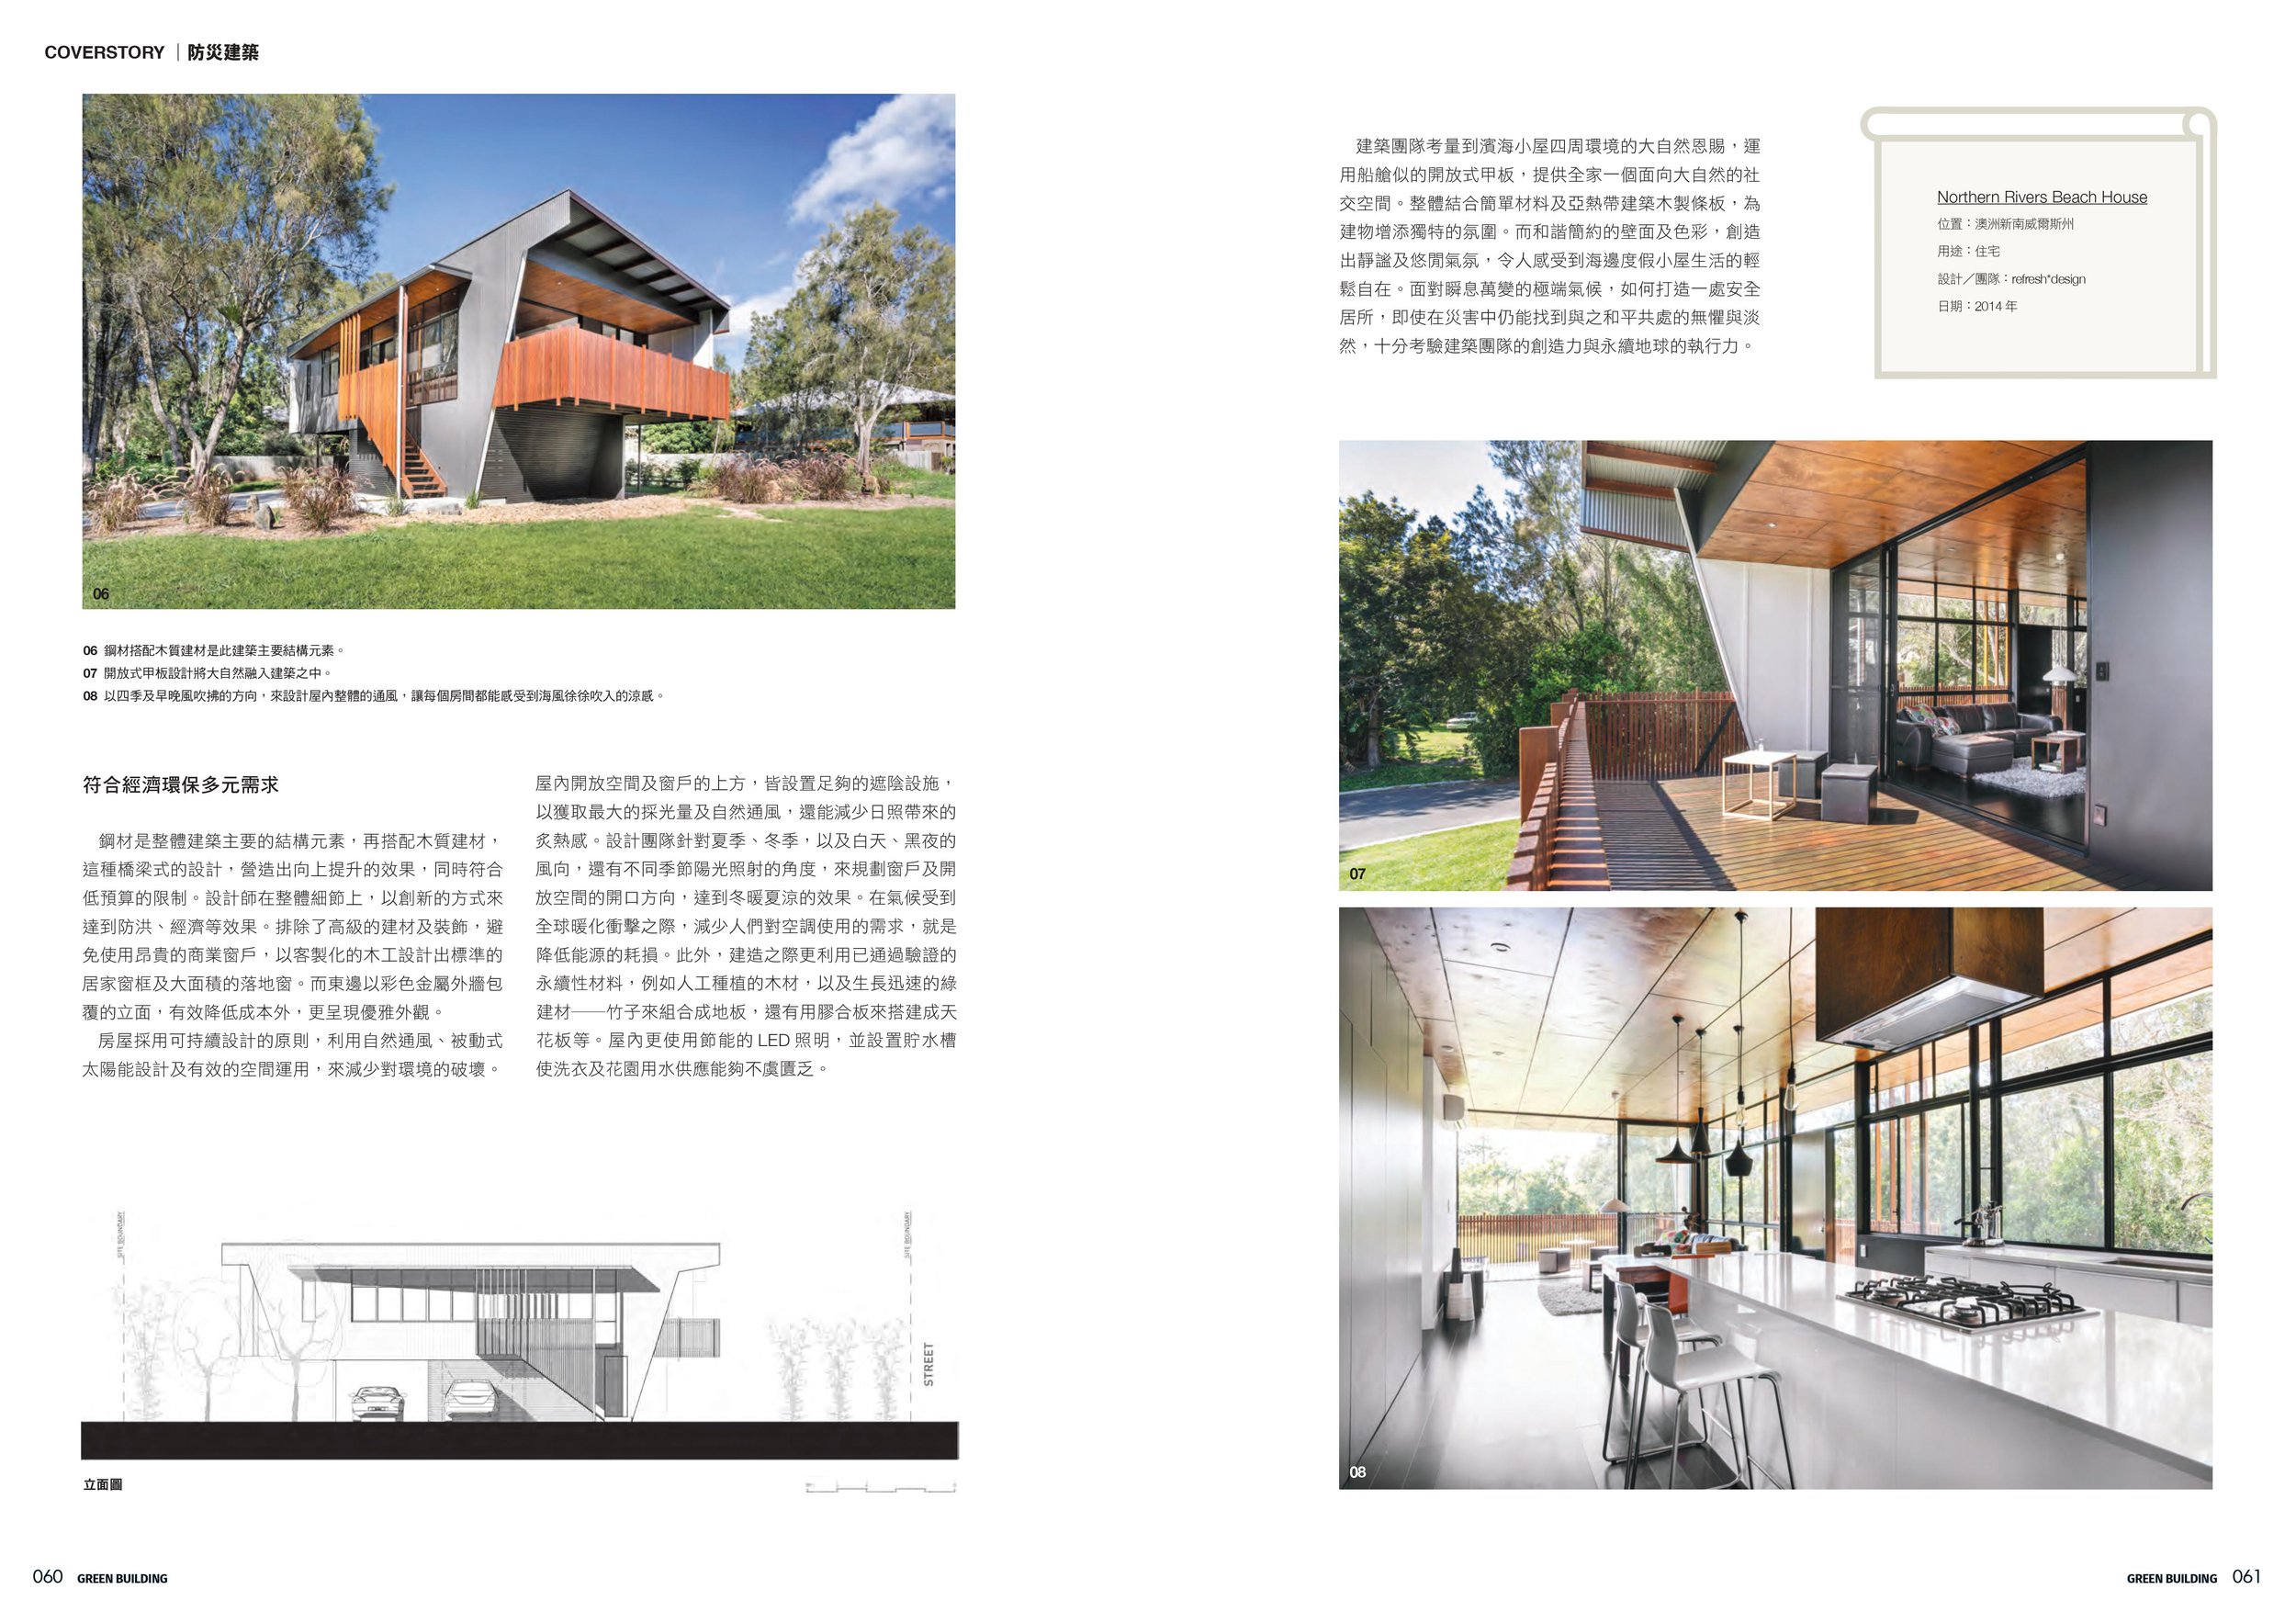 GREEN BUILDING 54_COVERSTORY_Northern Rivers Beach House_p3.jpg